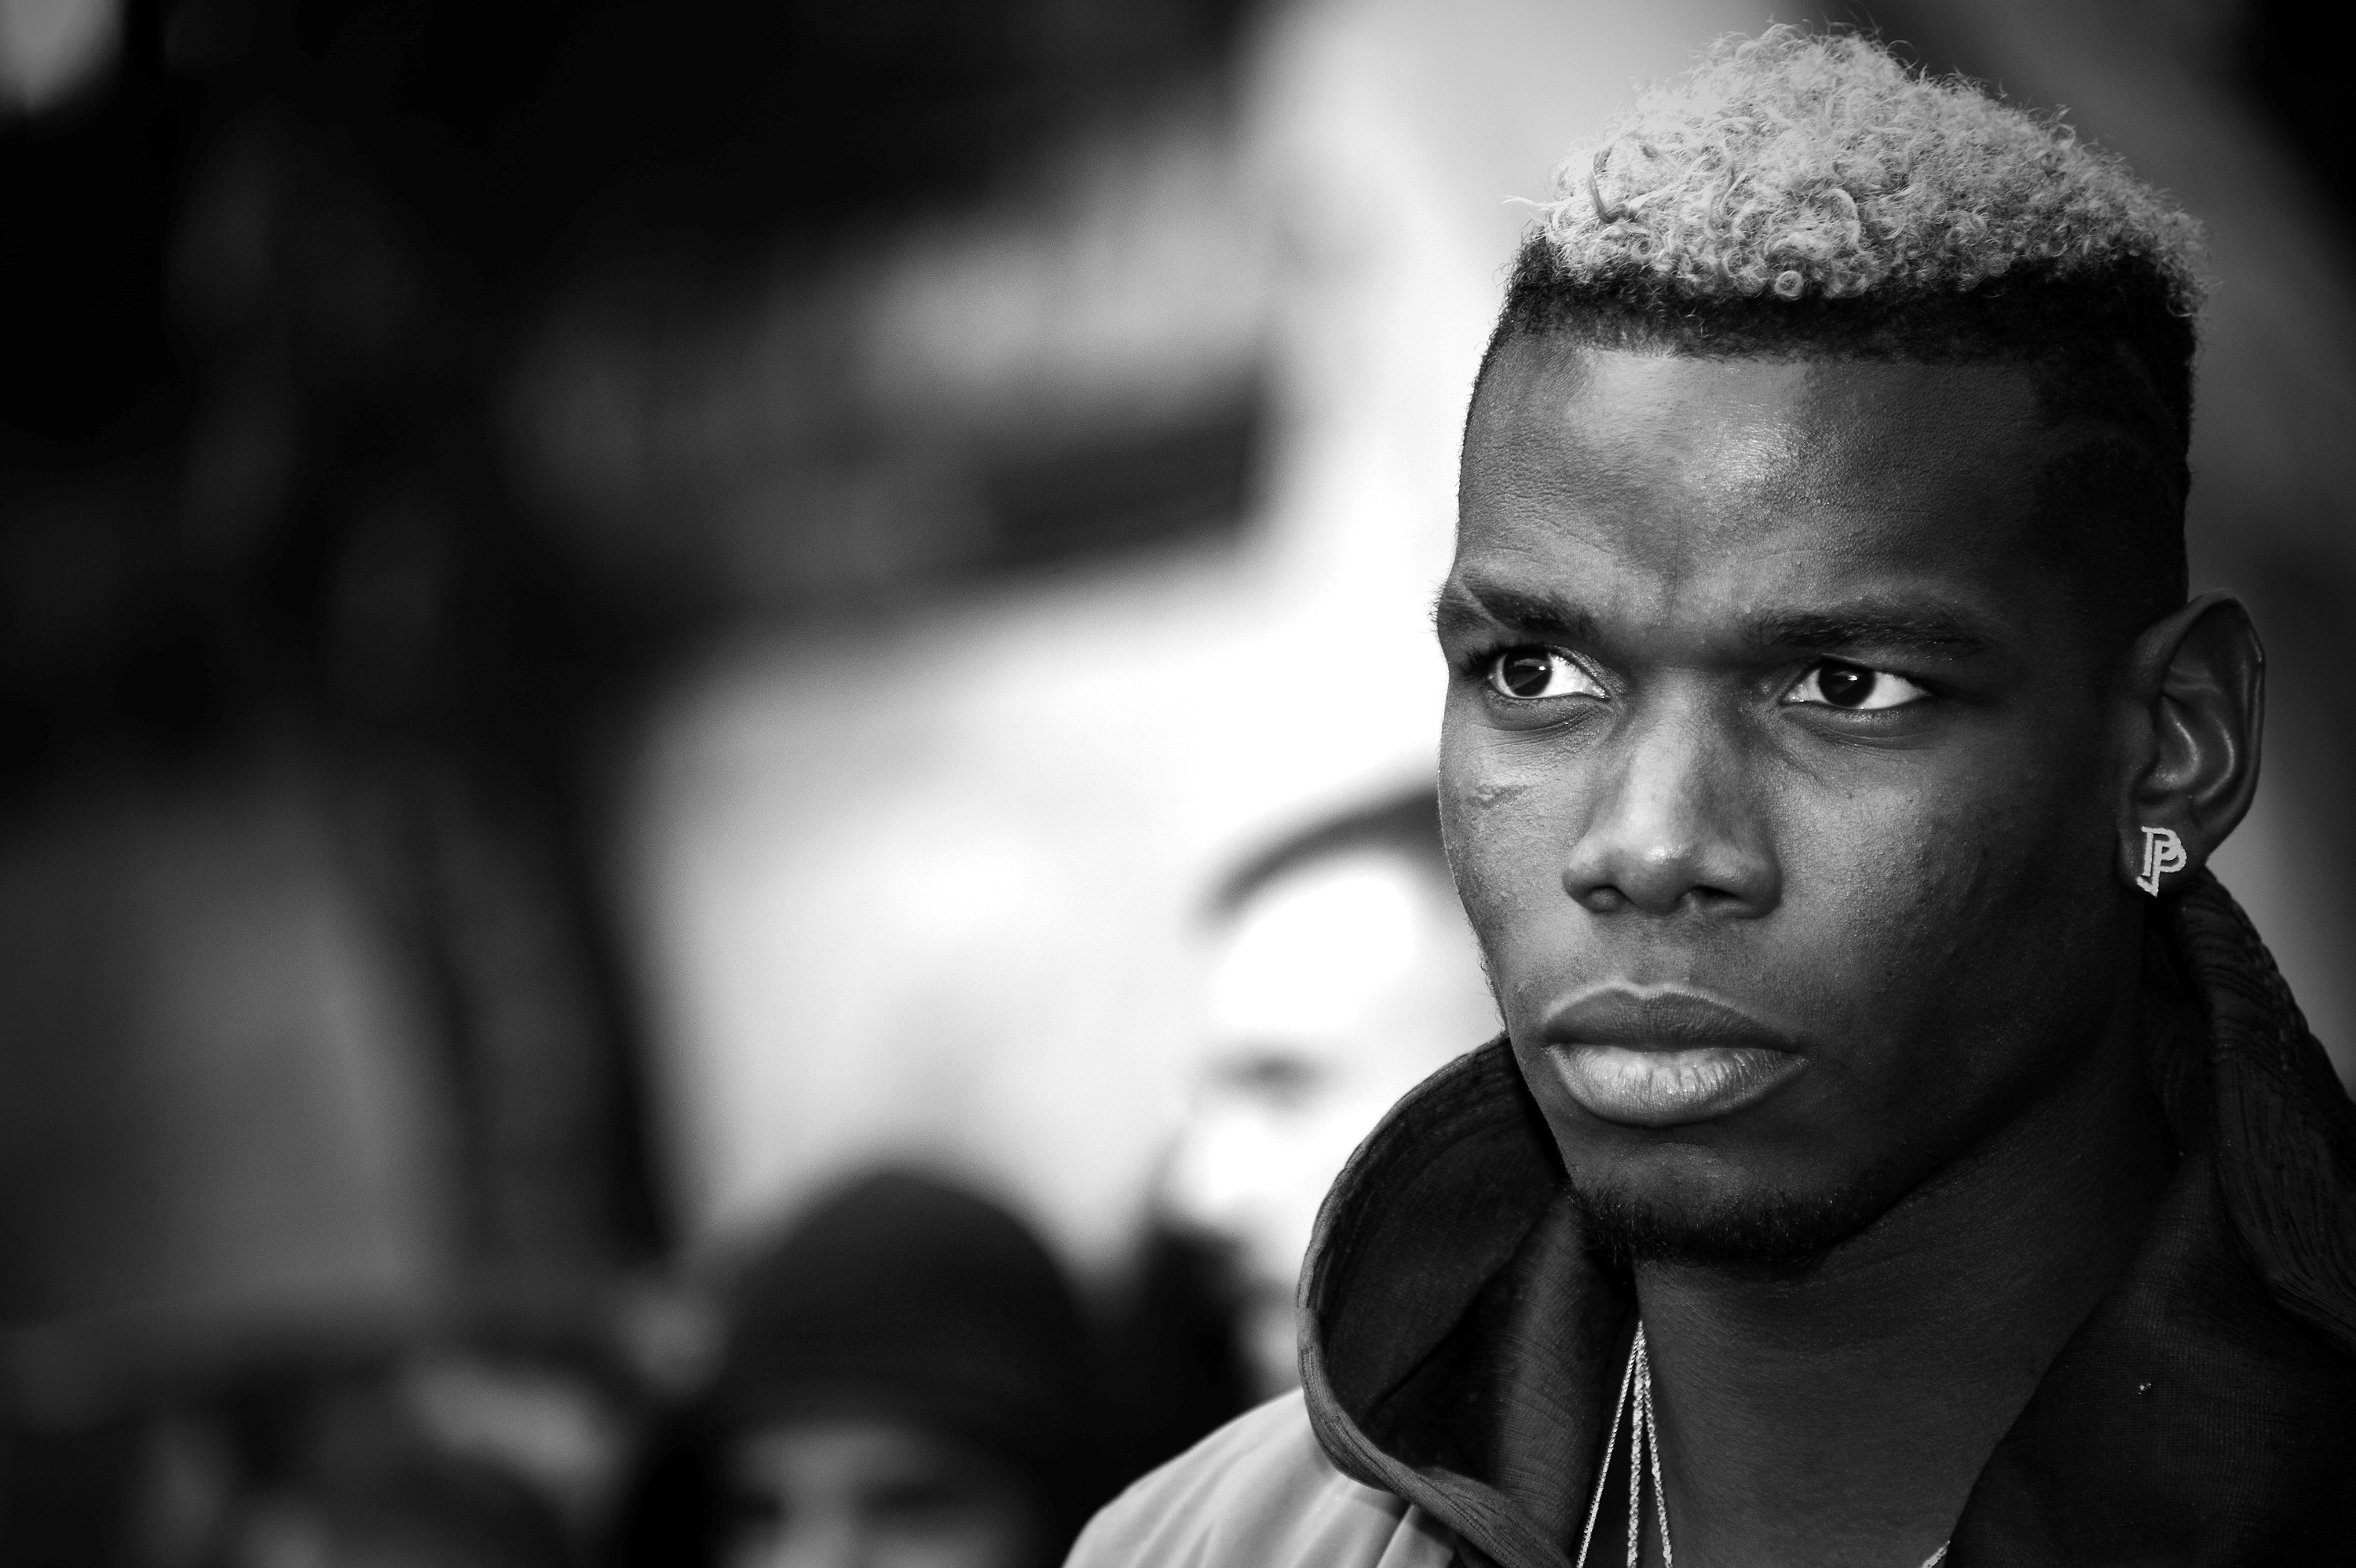 Manchester United midfielder Paul Pogba will feature in a documentary series on Amazon Prime 